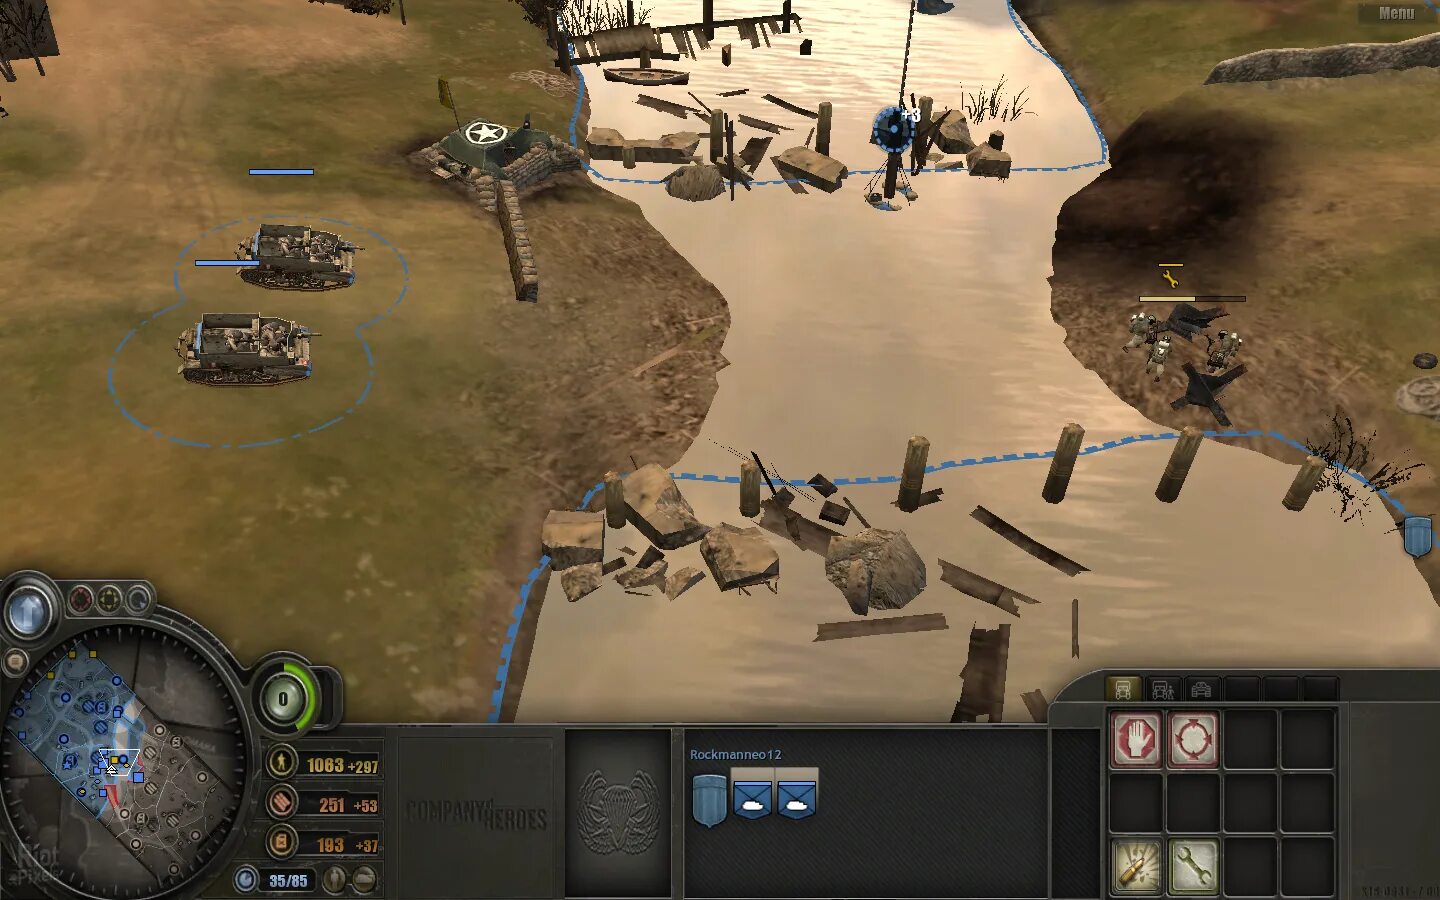 Company of Heroes opposing Fronts. Company of Heroes 2007. Company of Heroes — opposing Fronts (2007). Company of Heroes Tales of Valor opposing Fronts. Company of heroes opposing